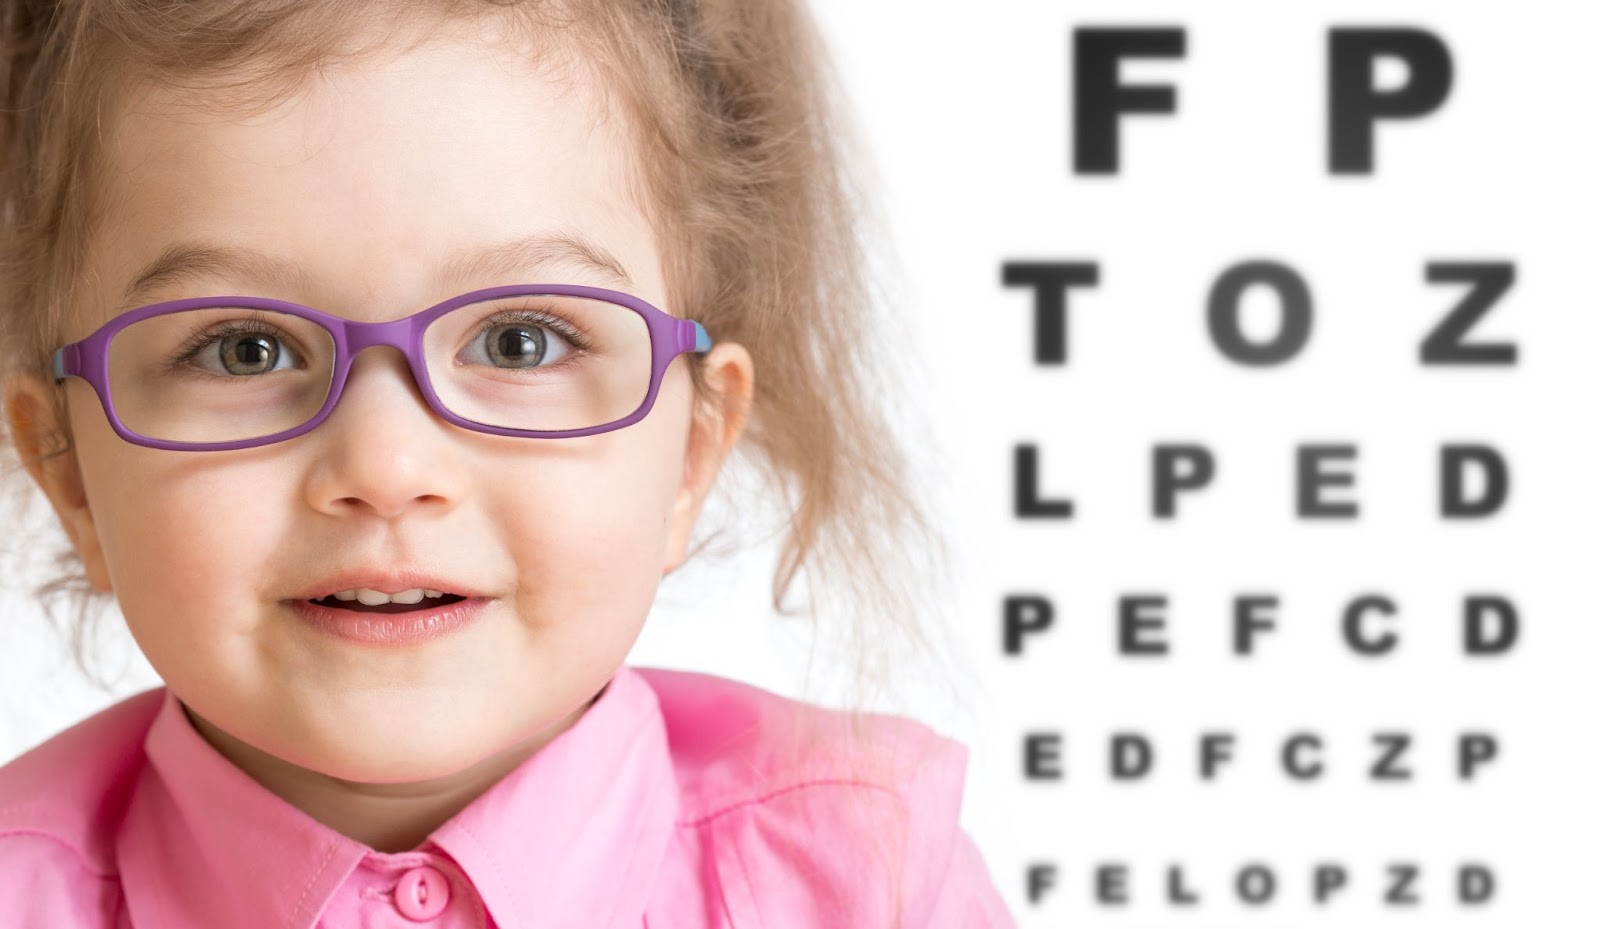 A little girl wearing eyeglasses with an eye chart in the background.
